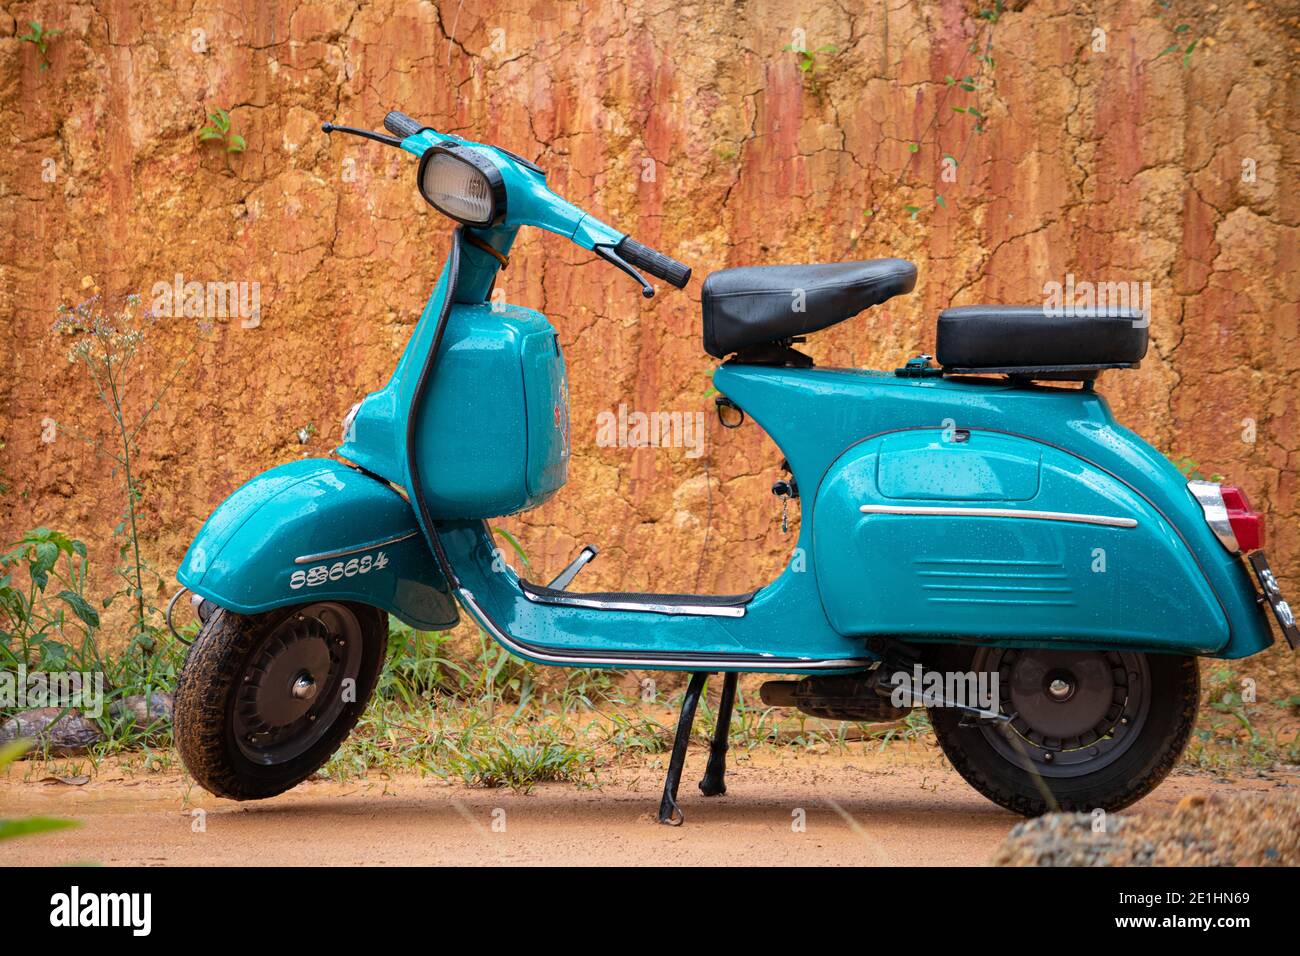 Old vintage scooter motorbike in display against clay wall. light blue color and two-seaters, compartments for storage, round headlamp in front. Stock Photo